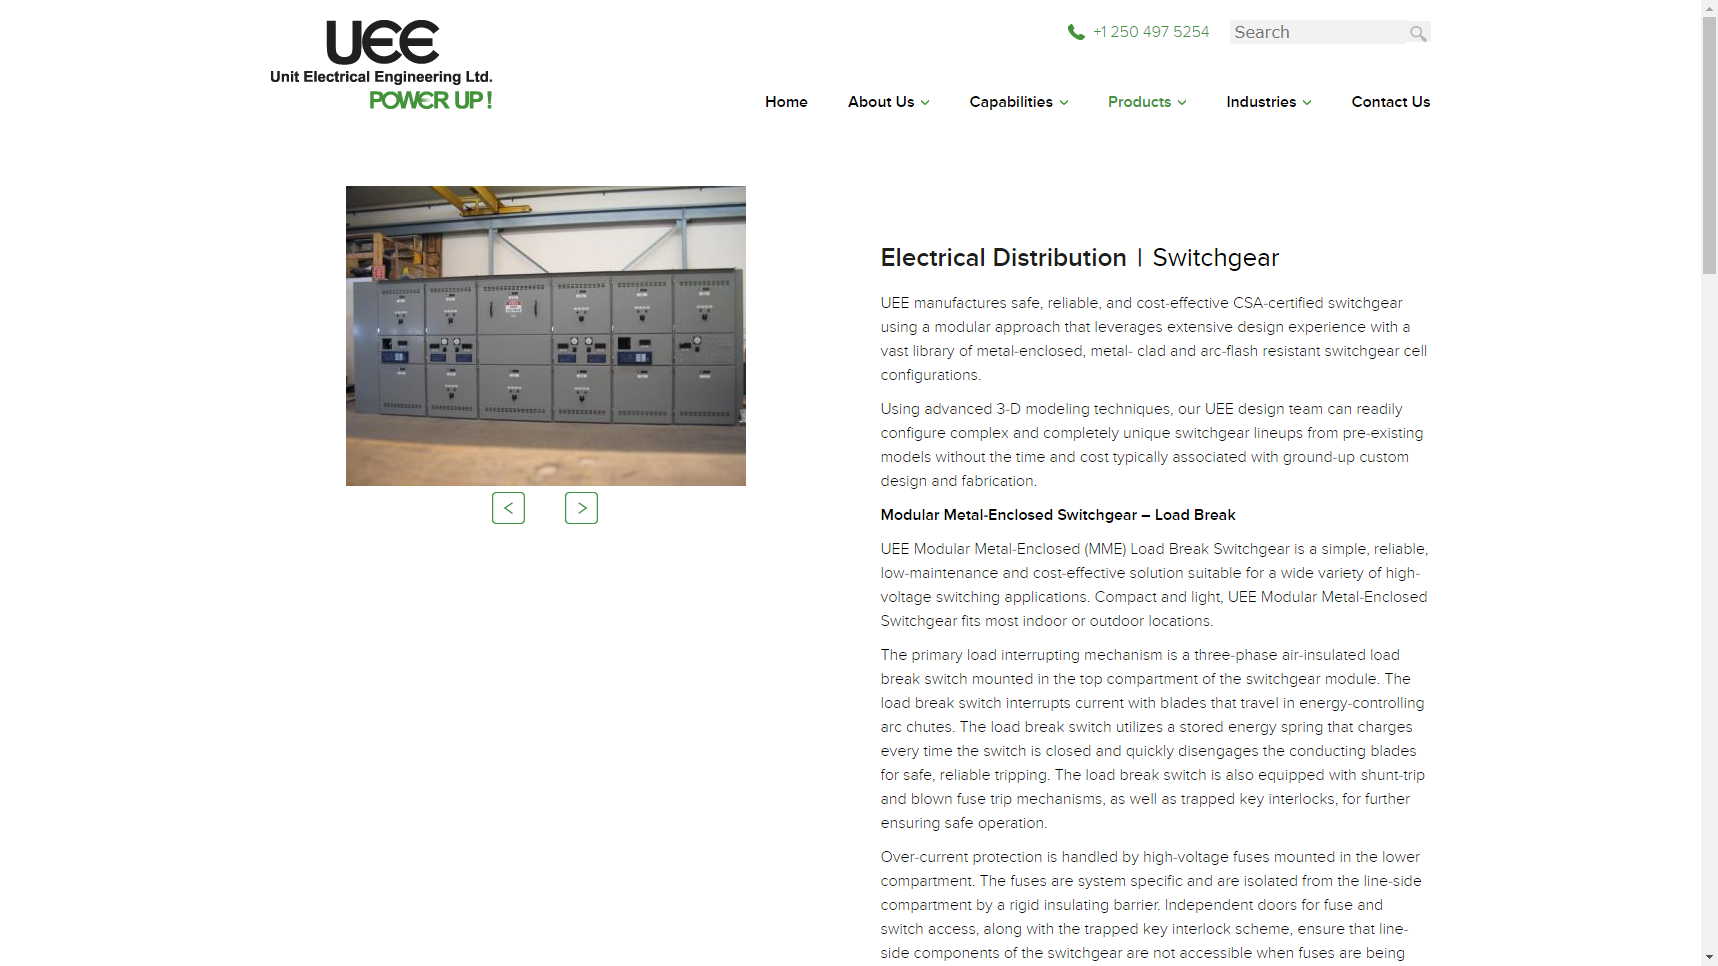 United Electrical Engineering (UEE) - Switchgear Manufacturer